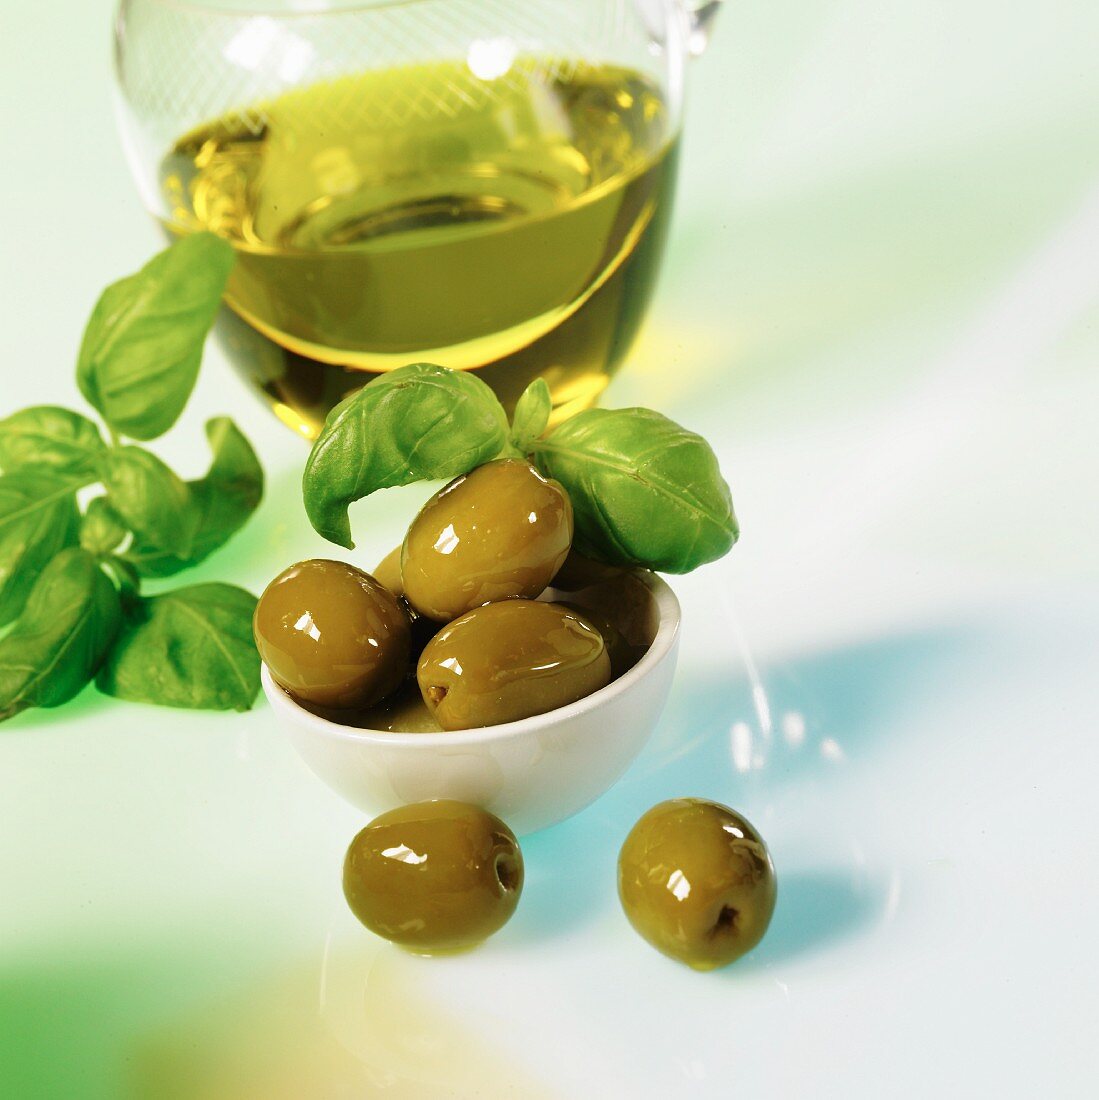 Green olives with olive oil and basil on a white surface